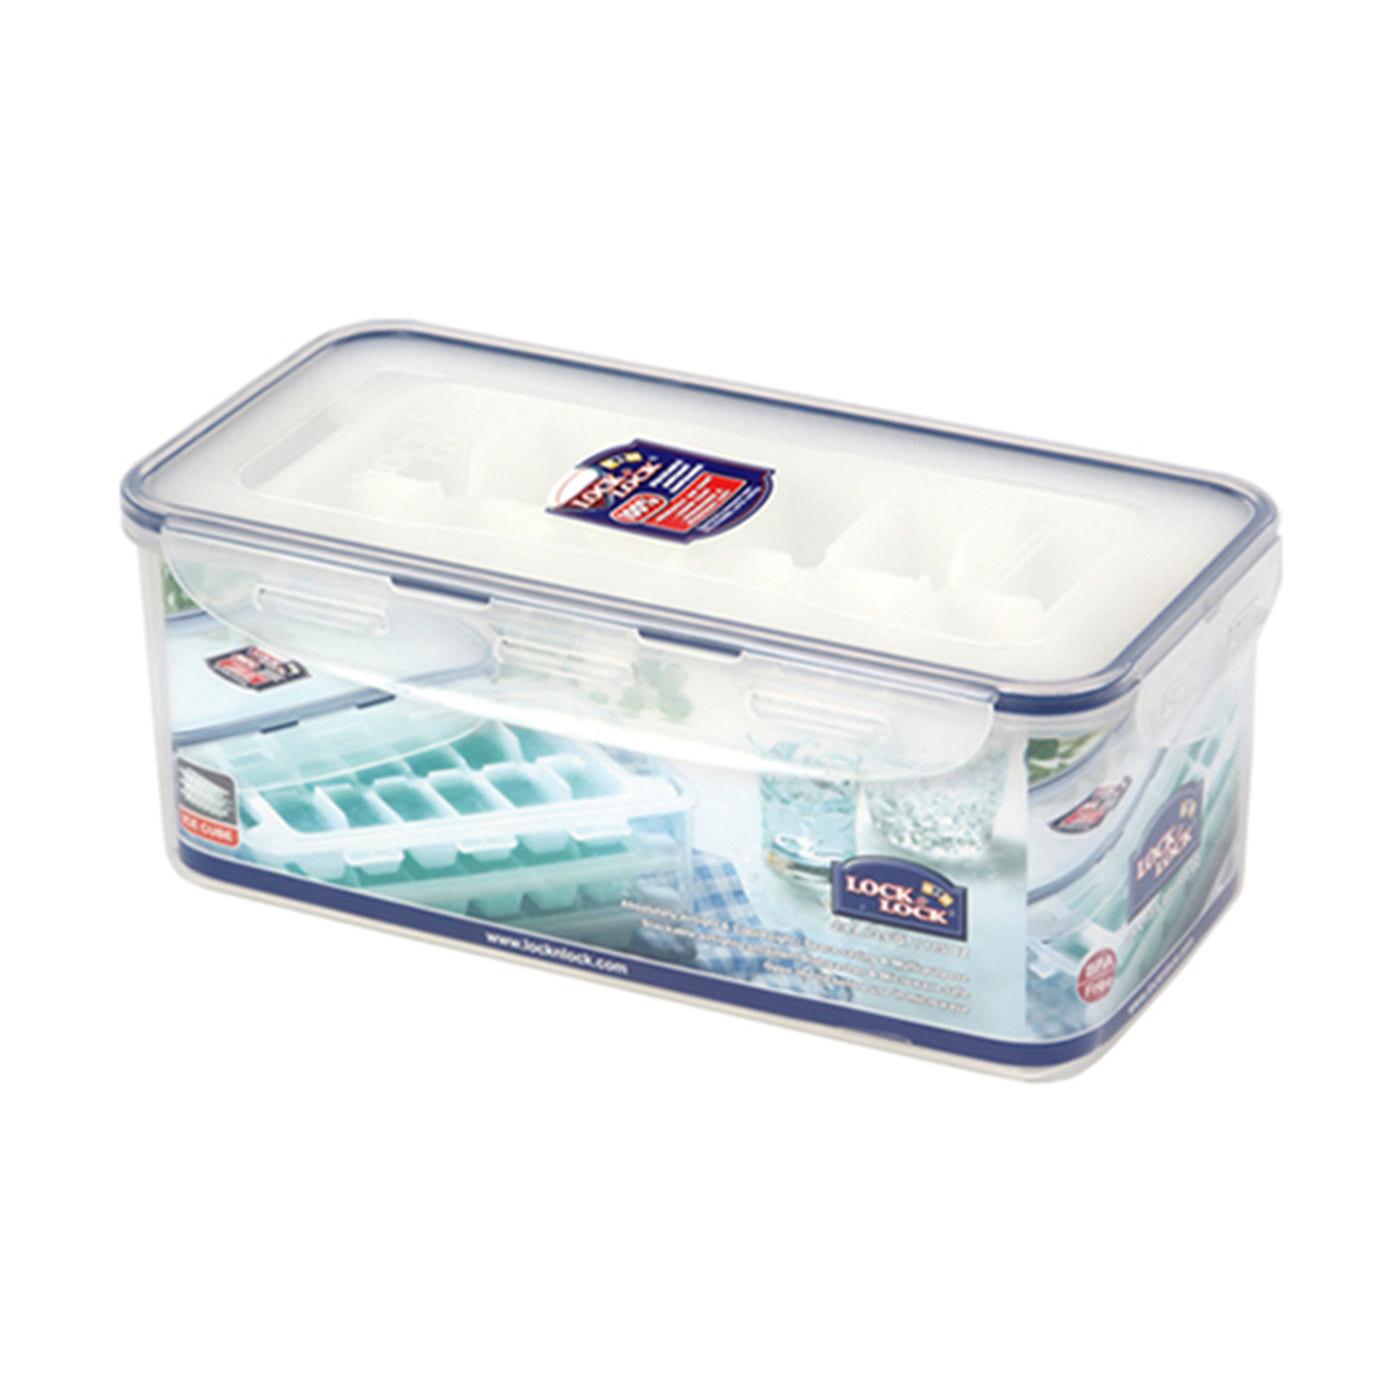 Classic ICE Cube Container with Tray - 3.4 LTR